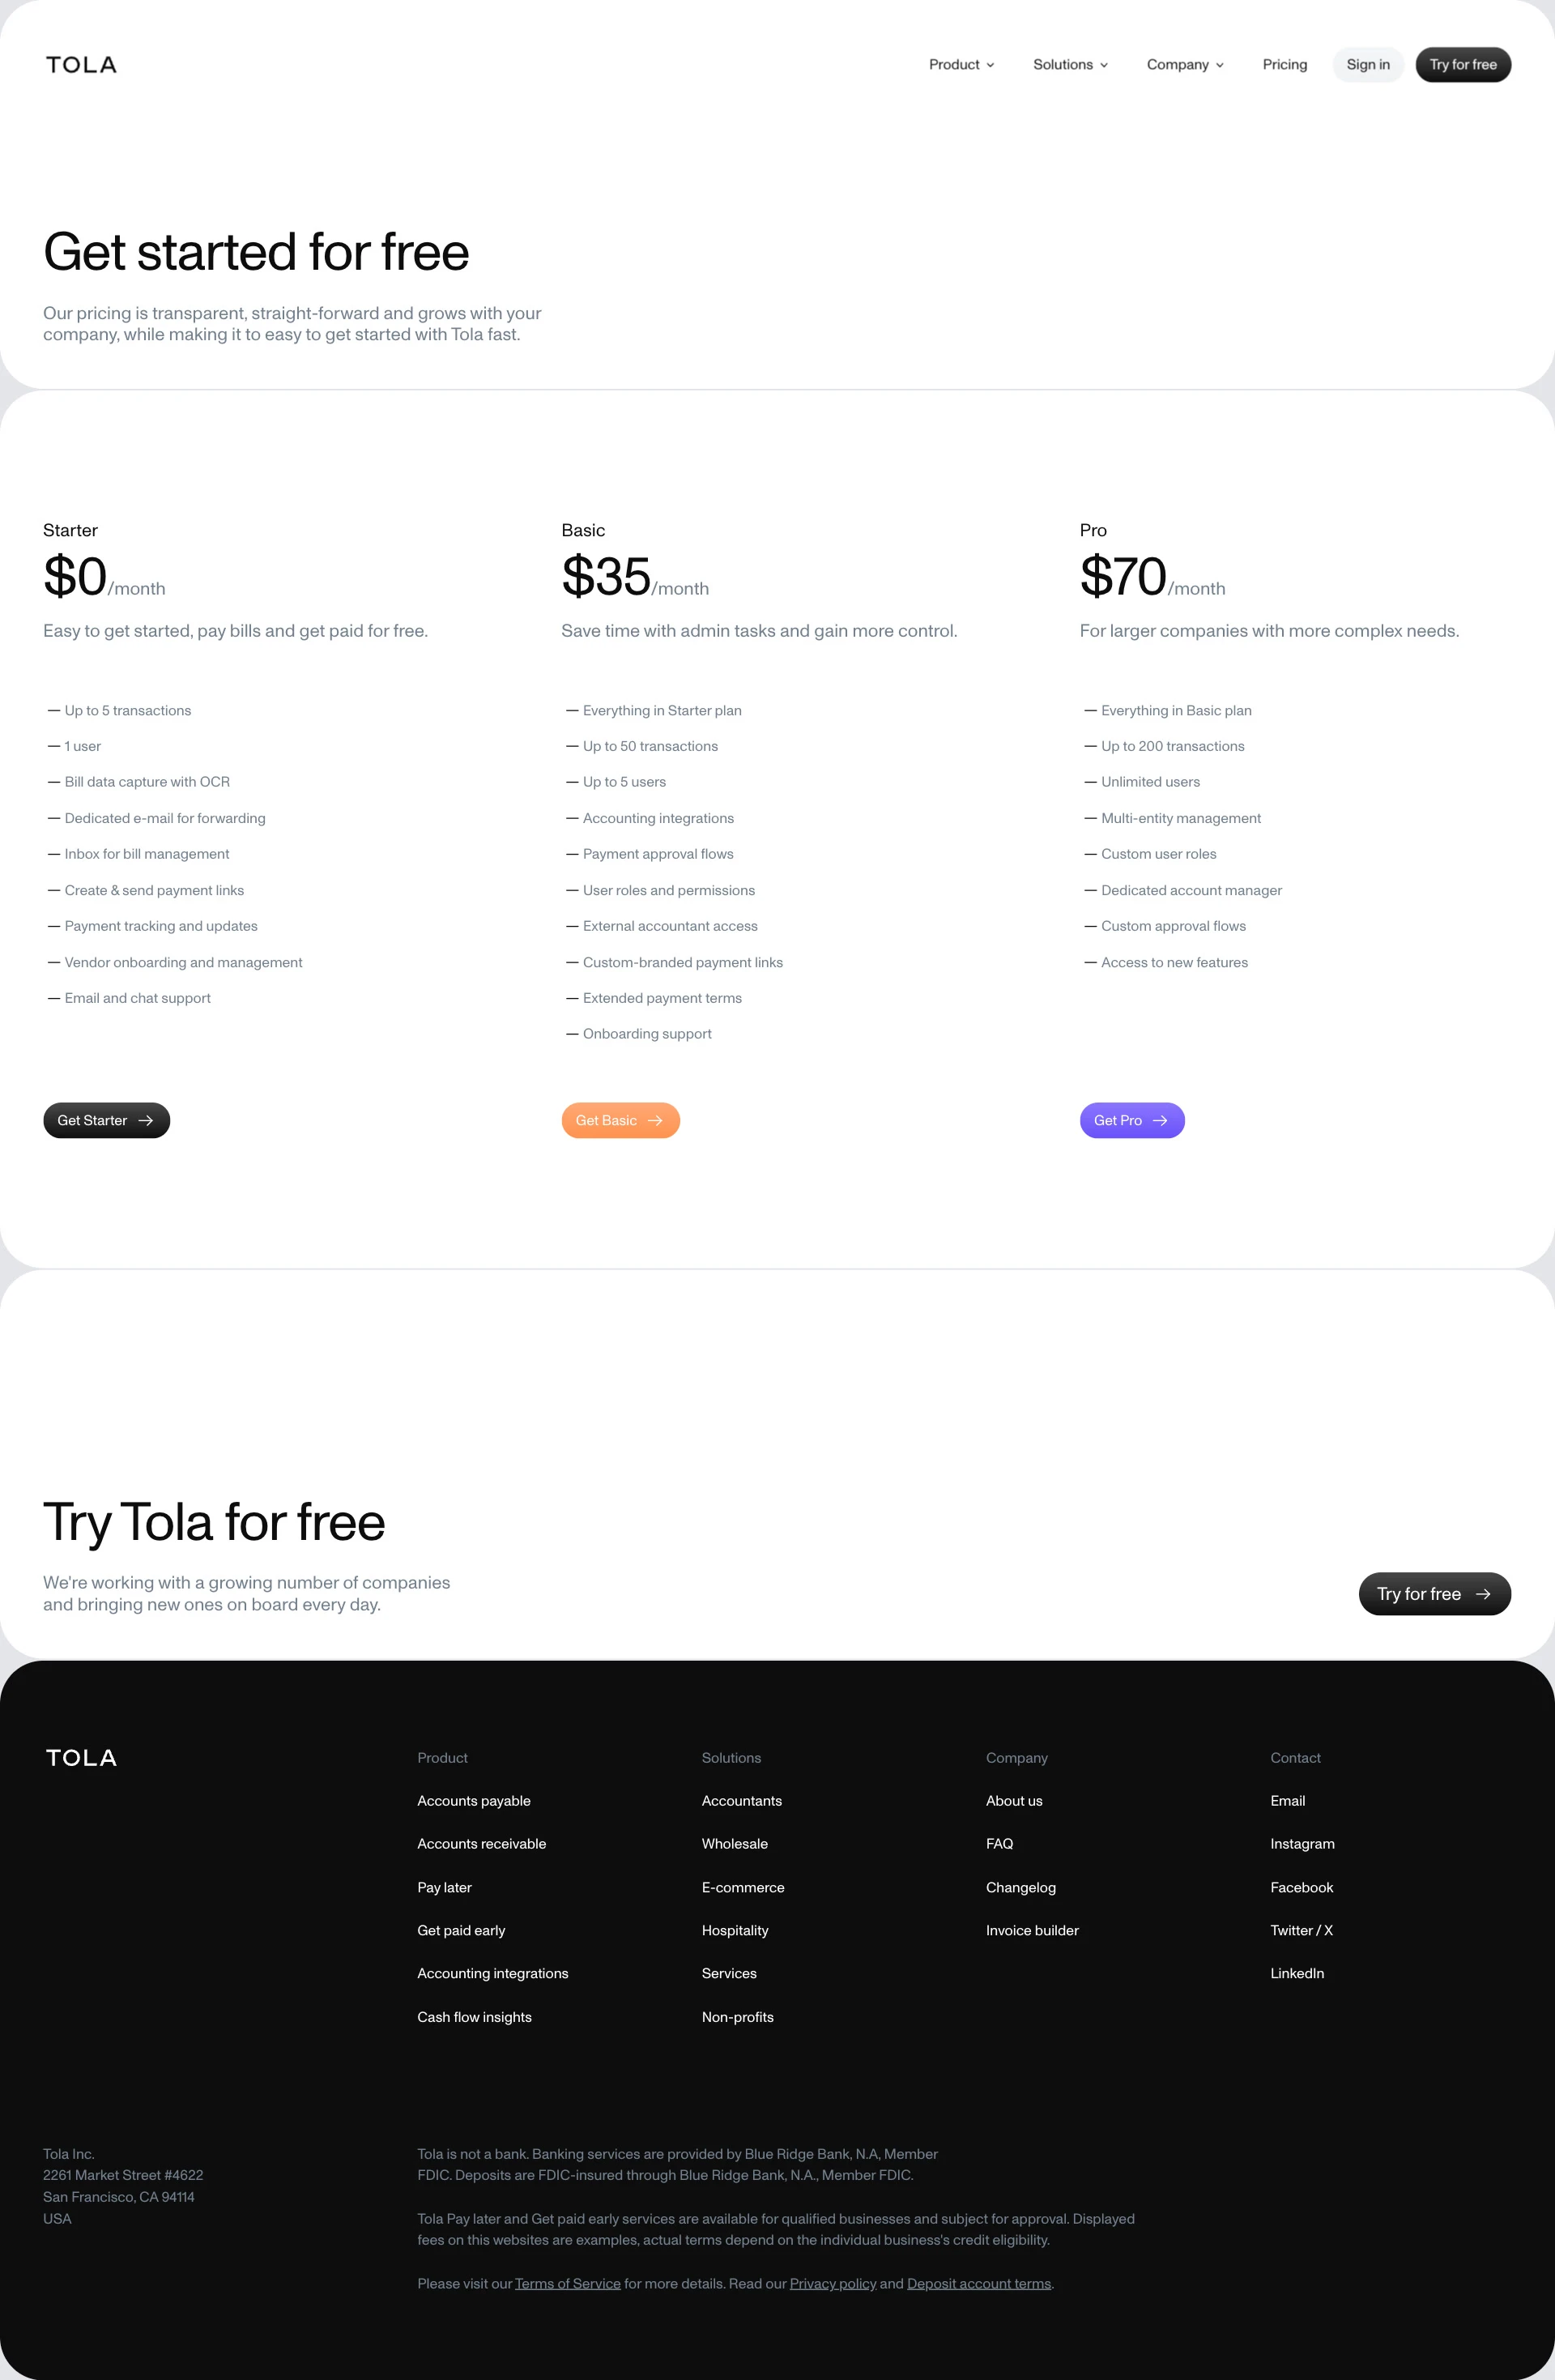 Tola Landing Page Example: Pay bills, get paid and manage cash flow. Tola combines accounts payable, receivable and cash flow management with working capital, helping save businesses time and money.